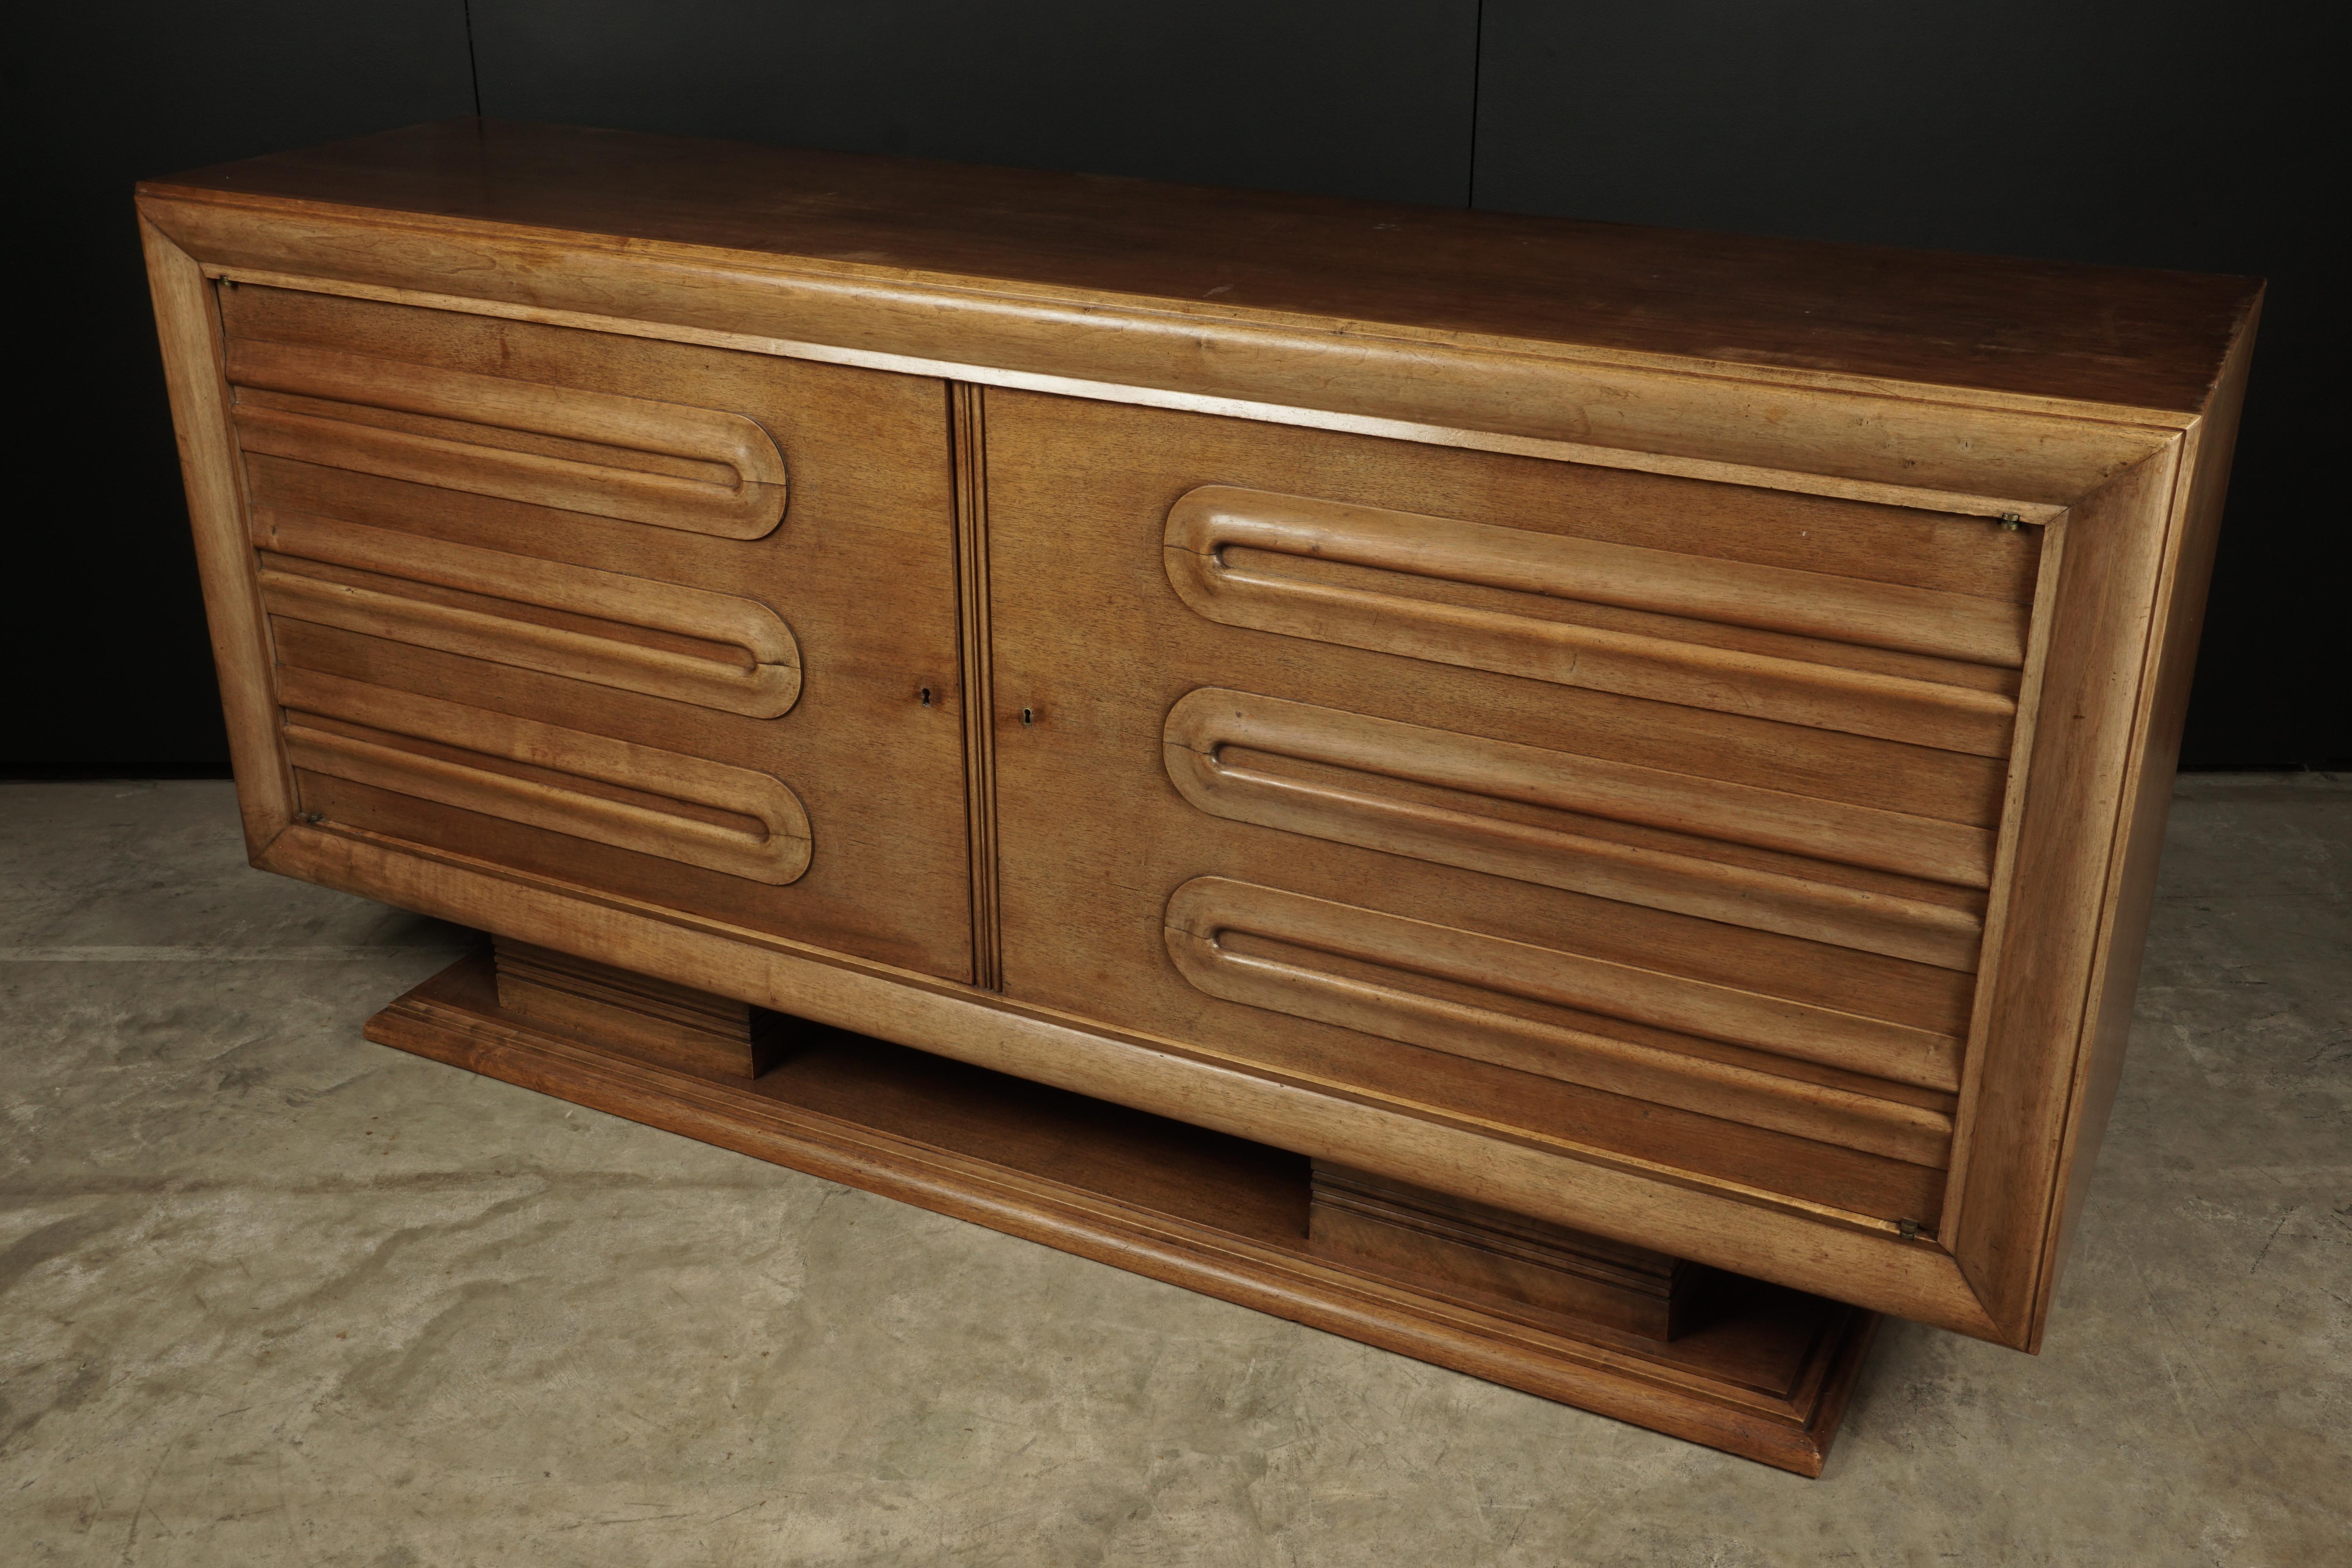 Rare midcentury sideboard attributed to Gabriel Englinger, France 1940s. High quality construction in elm. Two keys included.